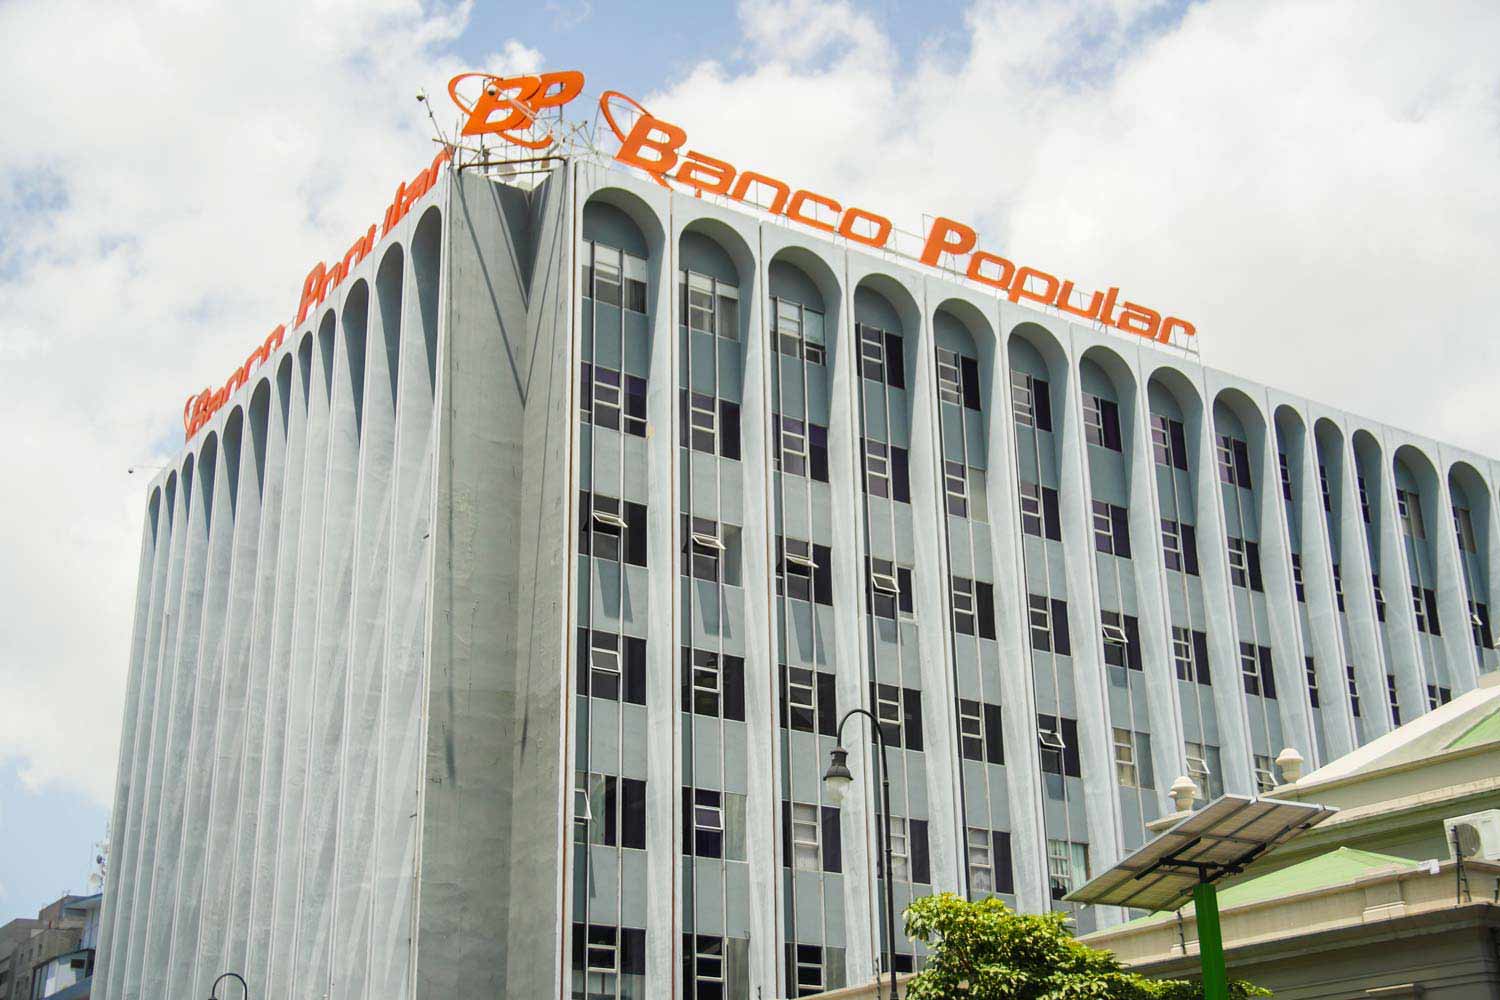 8-fascinating-facts-about-banco-popular